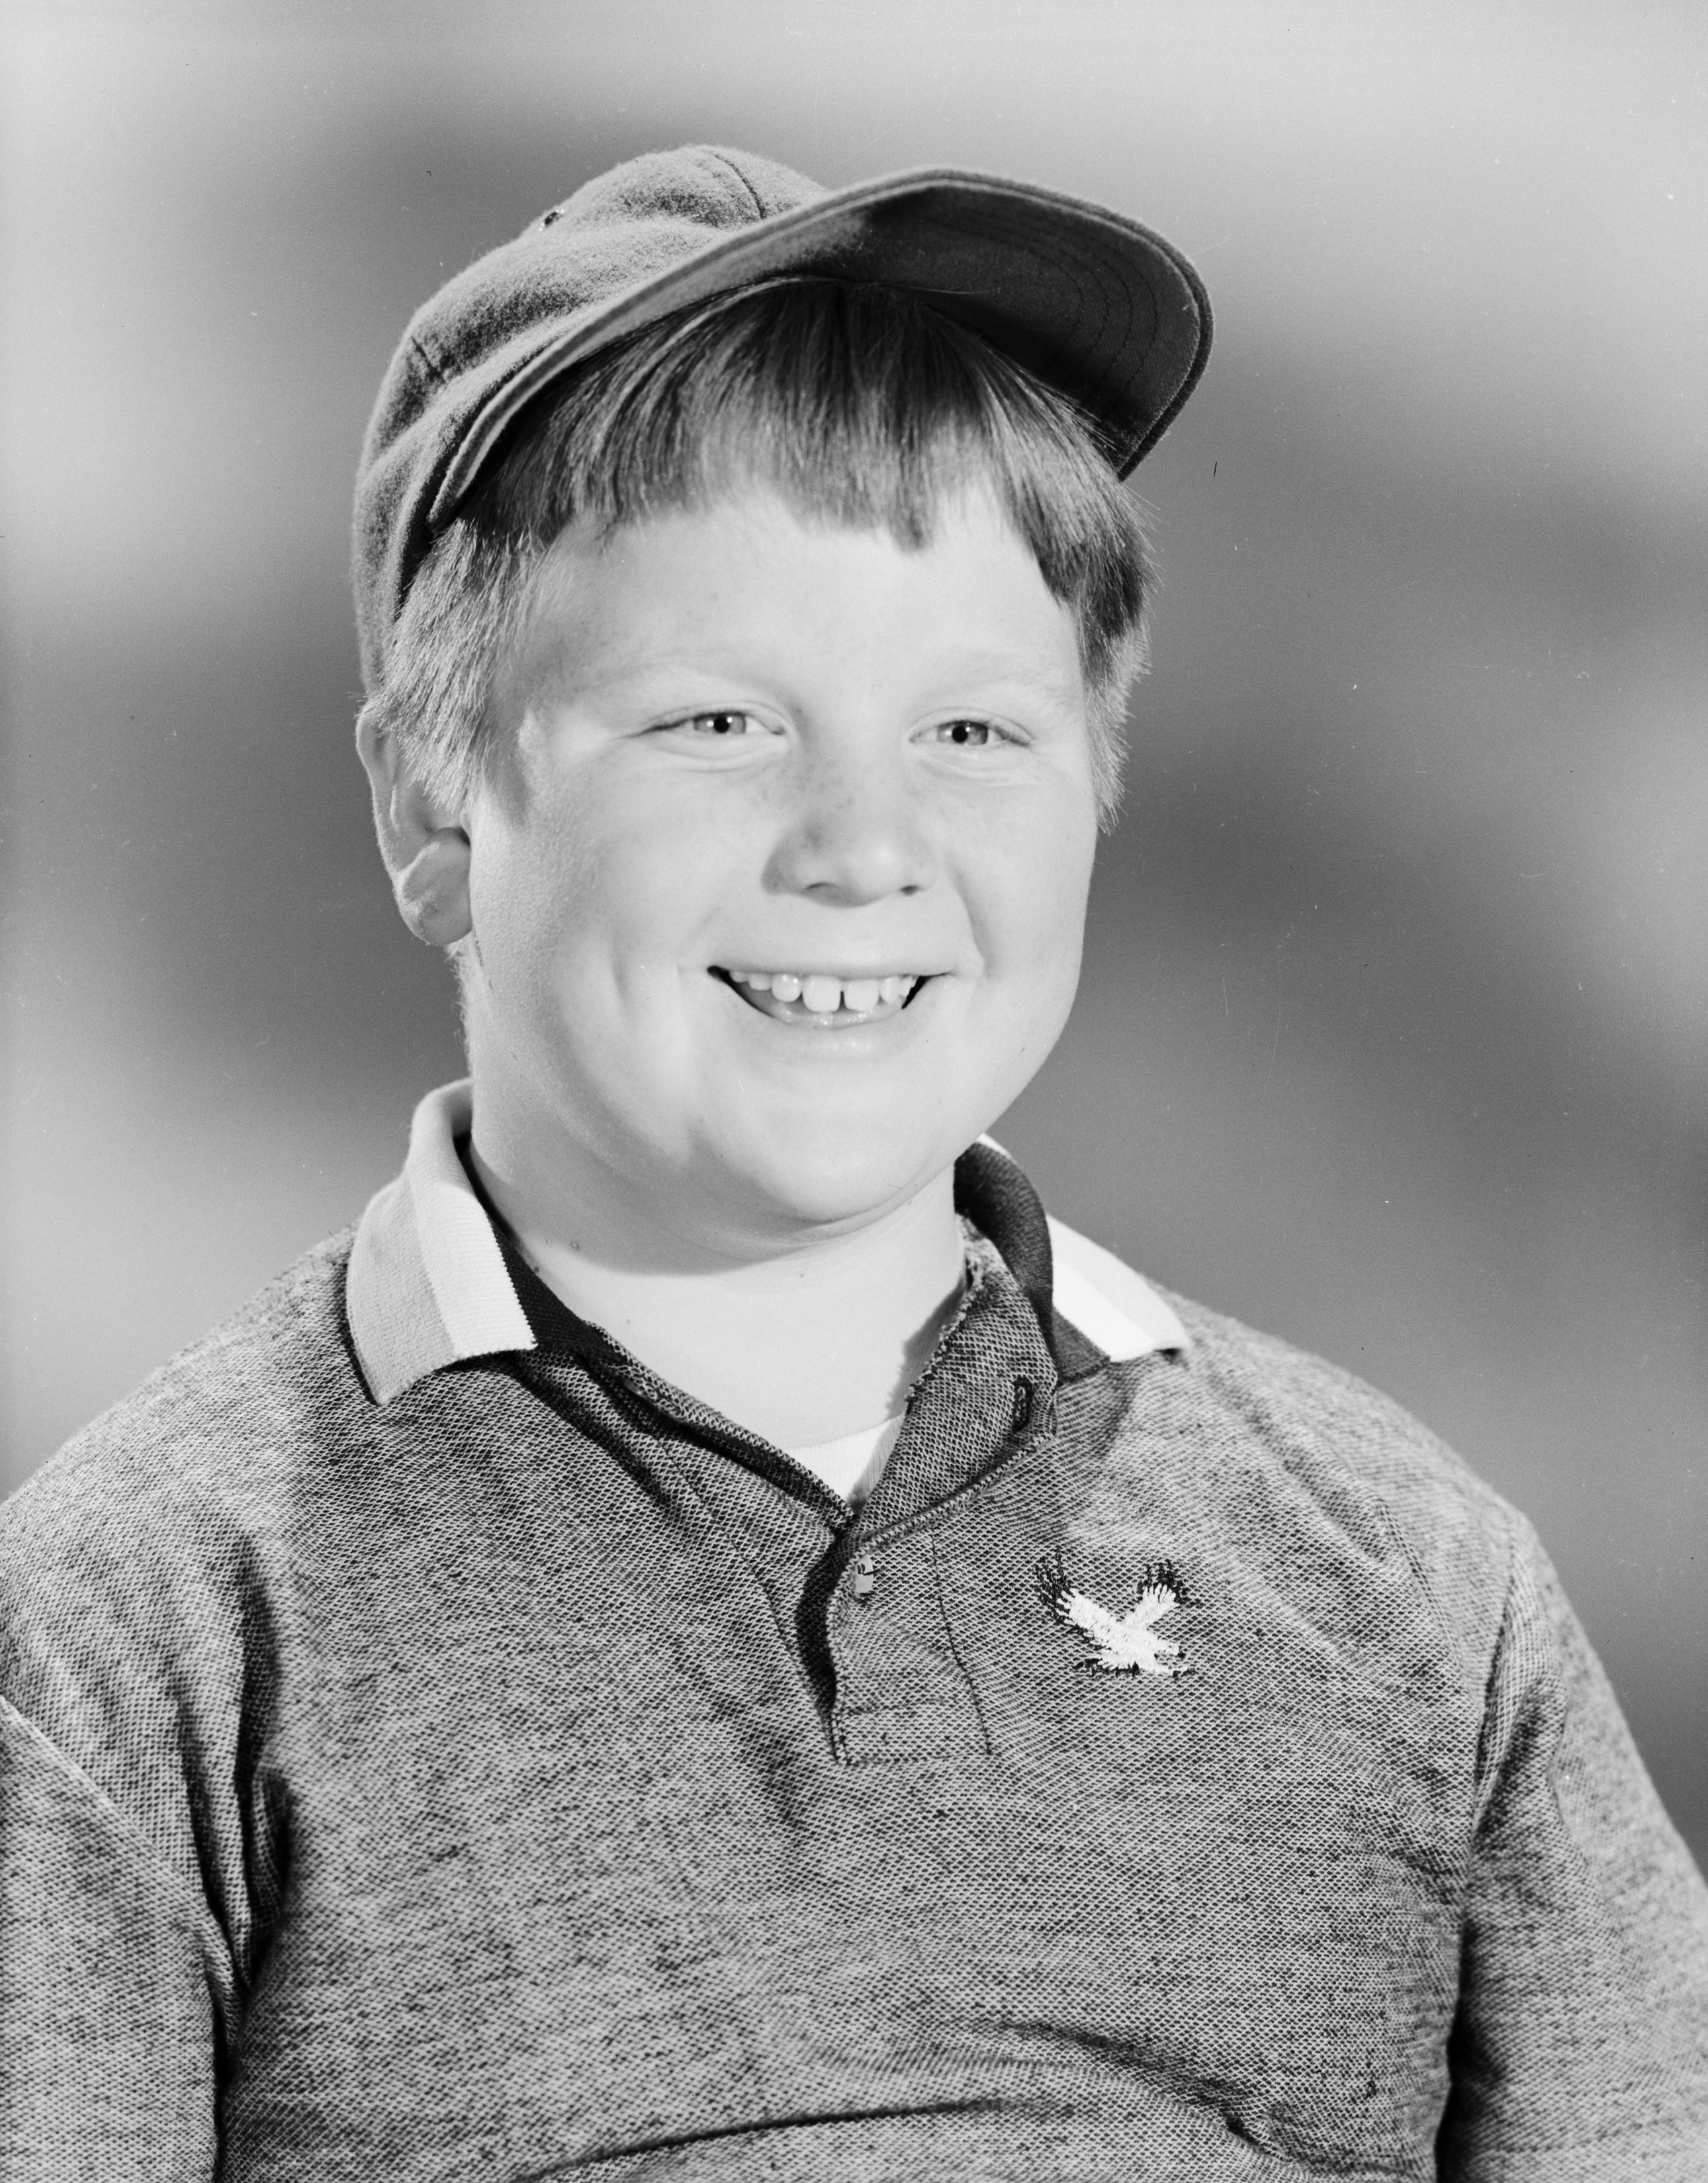 Promotional photo of Robert "Rusty" Stevens for "Leave It to Beaver" circa 1957 | Source: Getty Images